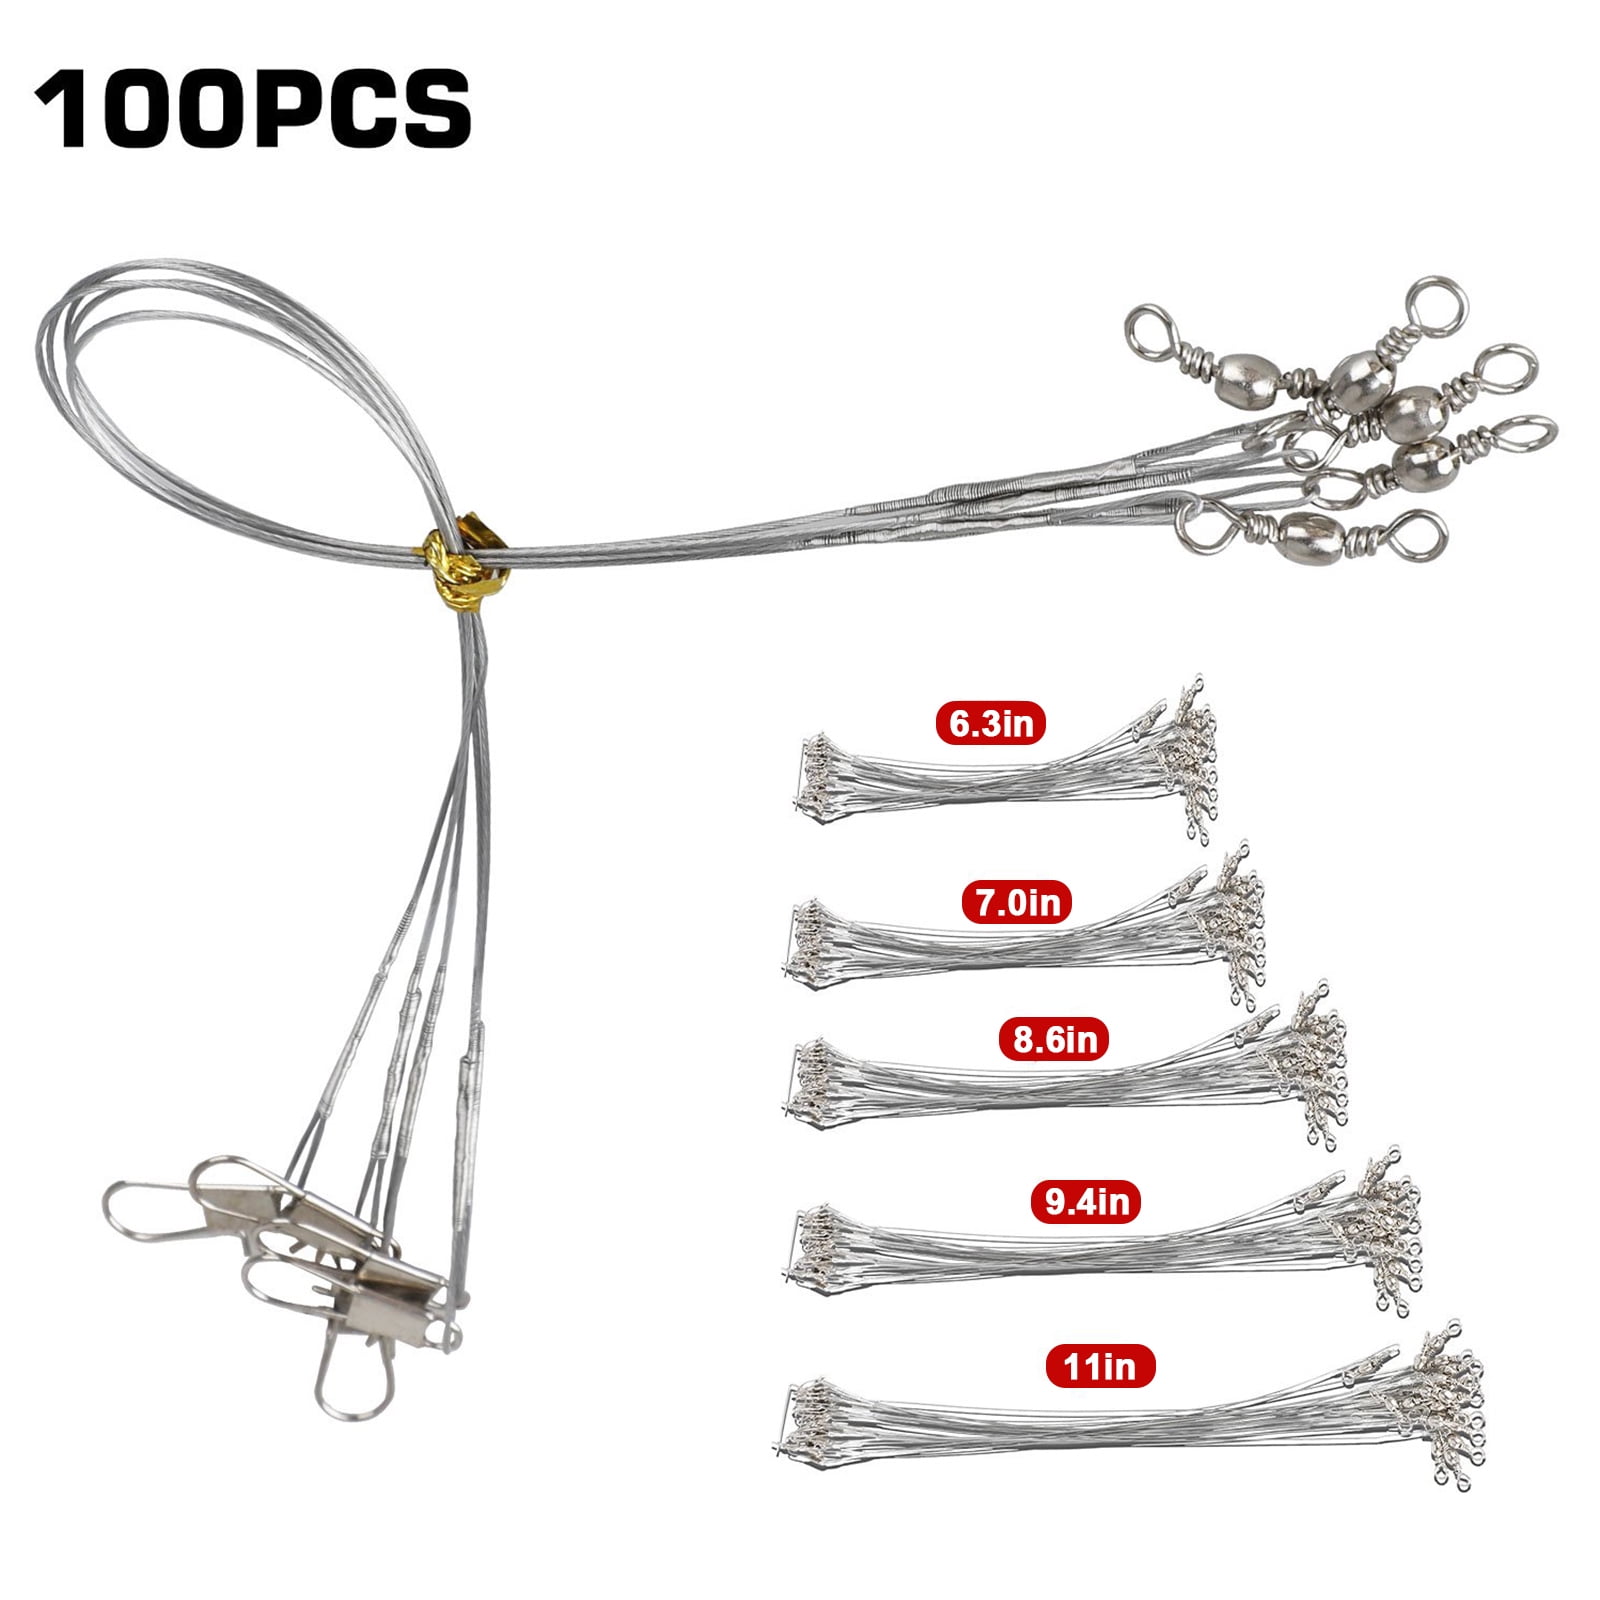 100PCS Fishing Wire Trace Lure Leaders, TSV Stainless Steel High